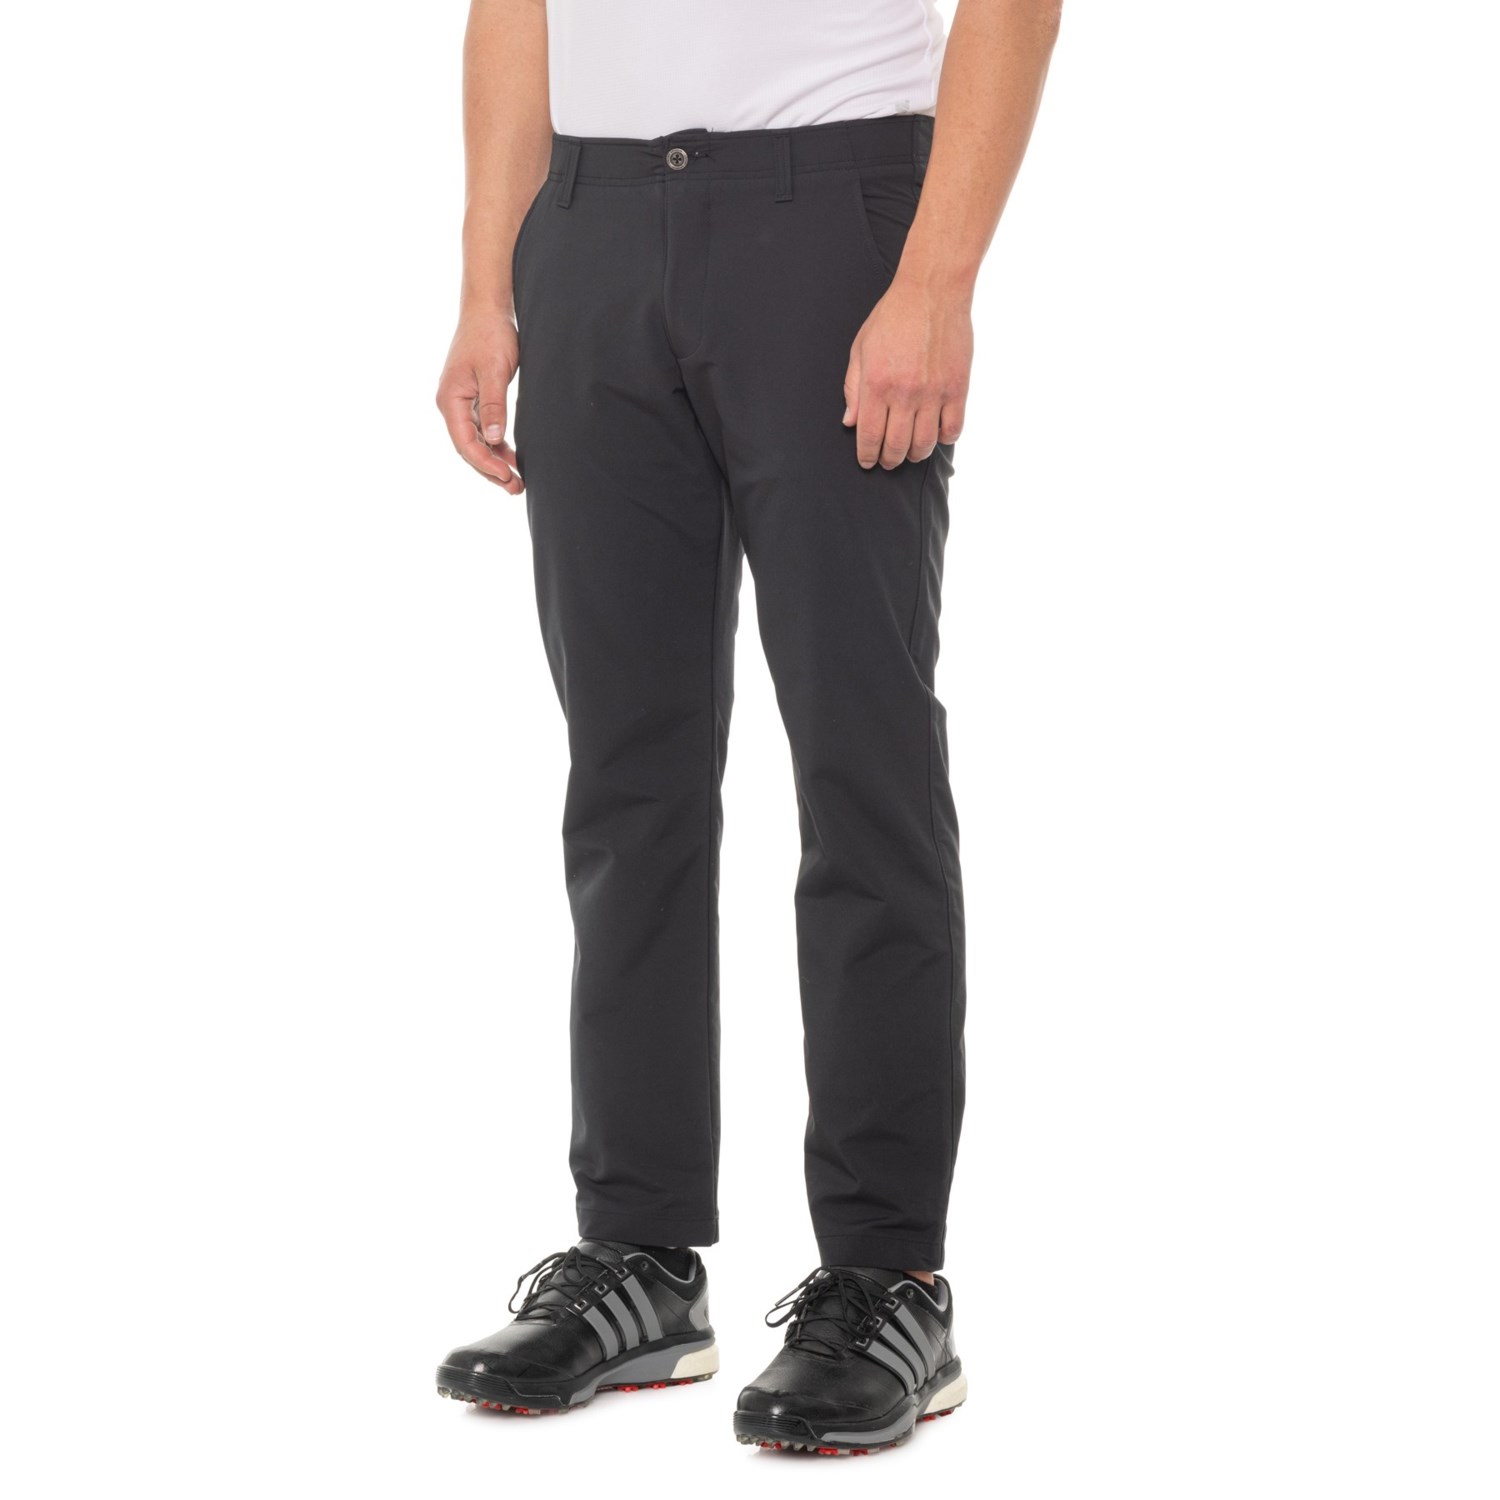 Under Armour Match Play Pants